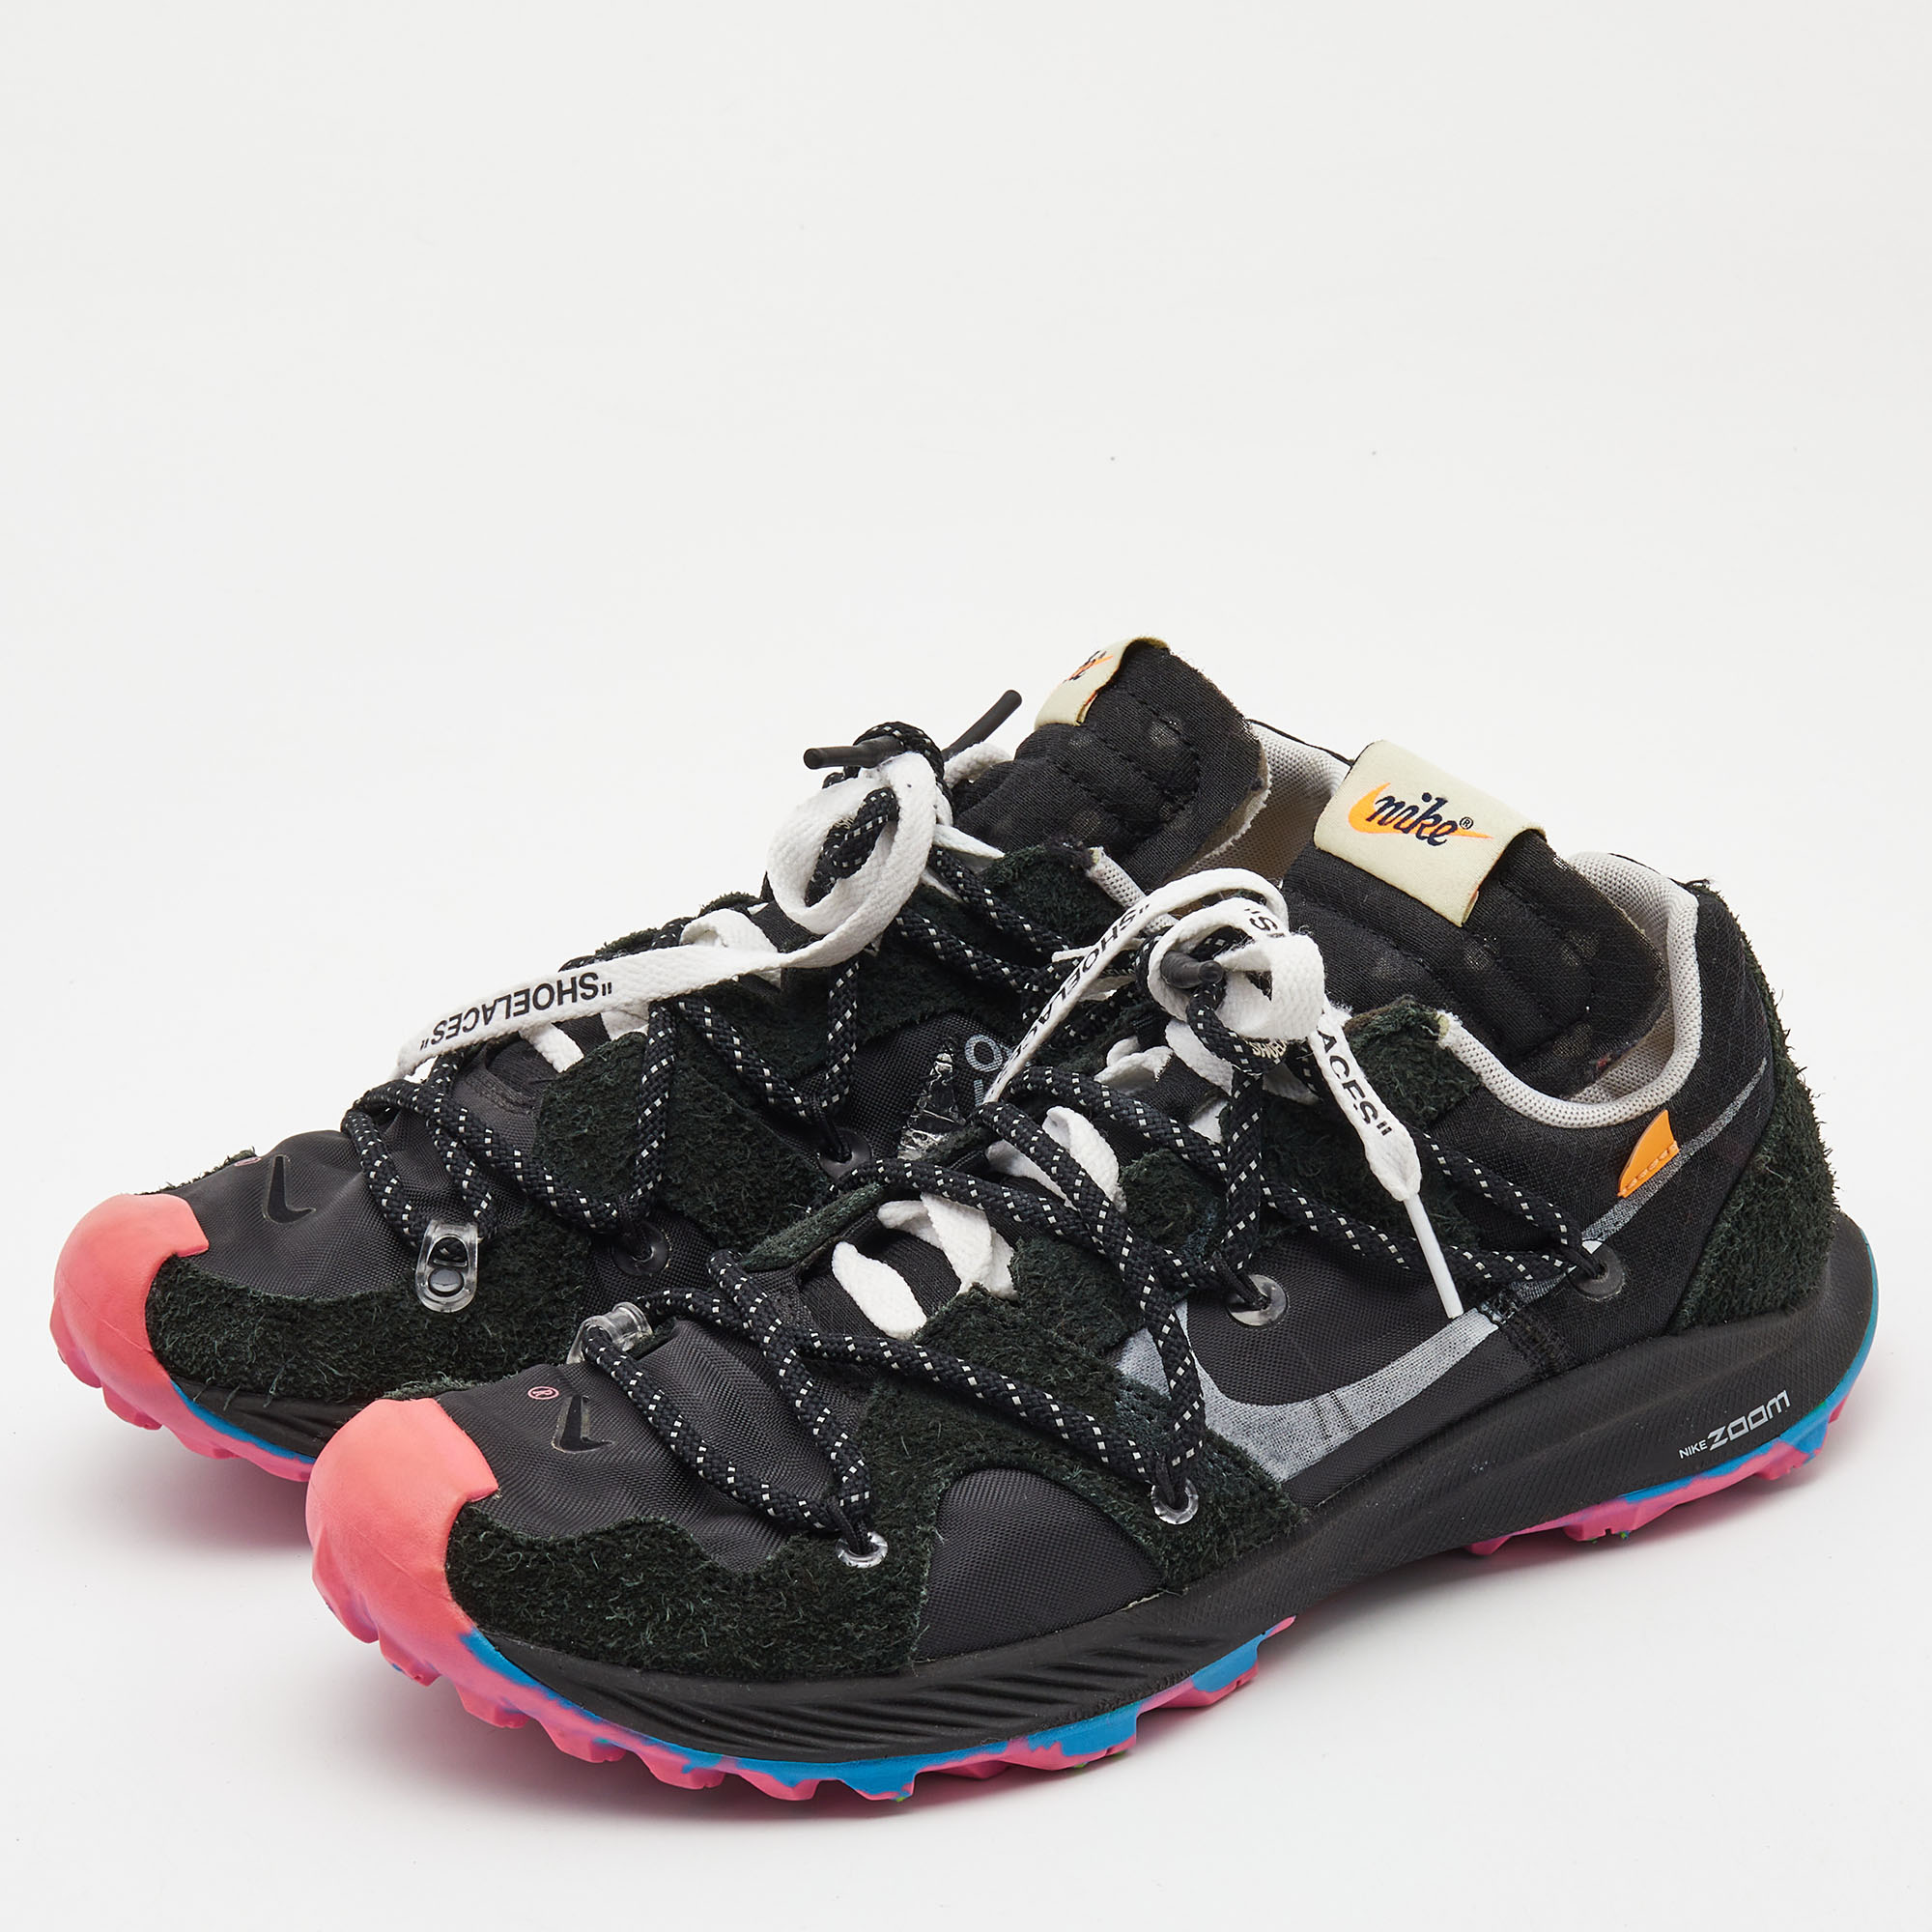 

Off-White x Nike Black/Pink Suede and Nylon Zoom Terra Kiger 5 Sneakers Size